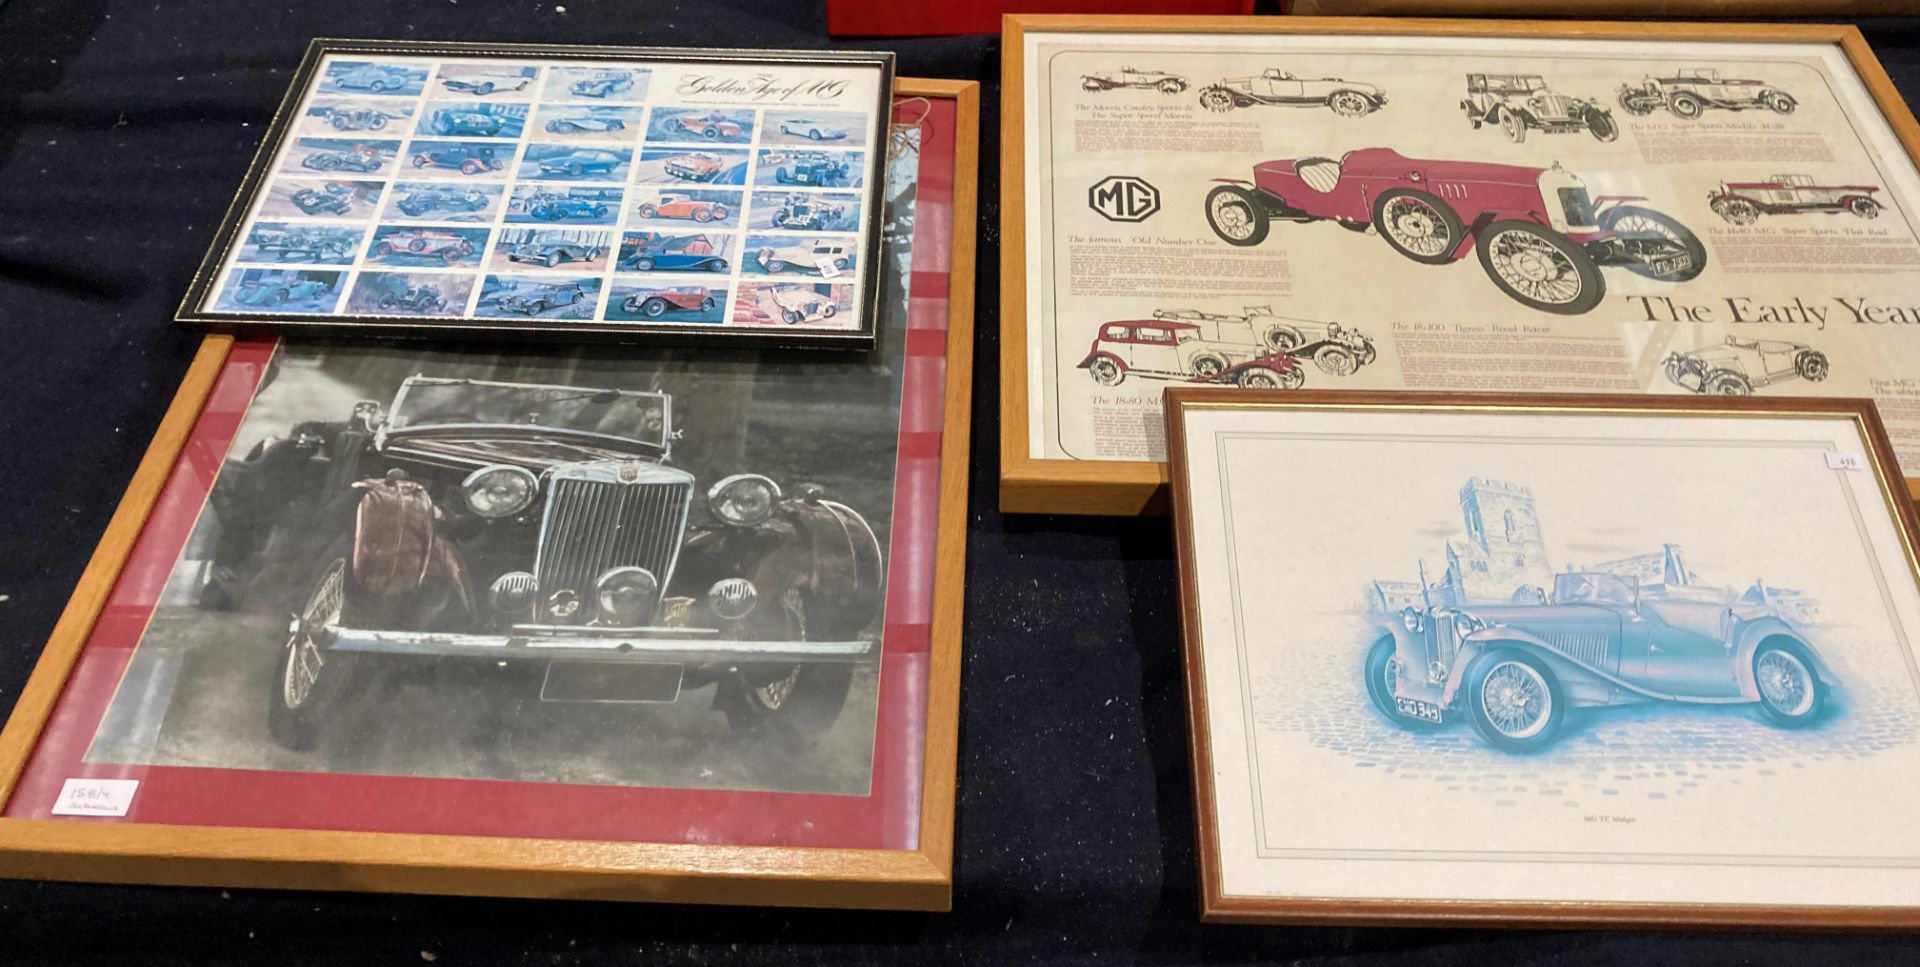 Four MG related picture in frames - 'The Early Years' (50 x 70cm), 'MG TC Midget' (33 x 43cm),